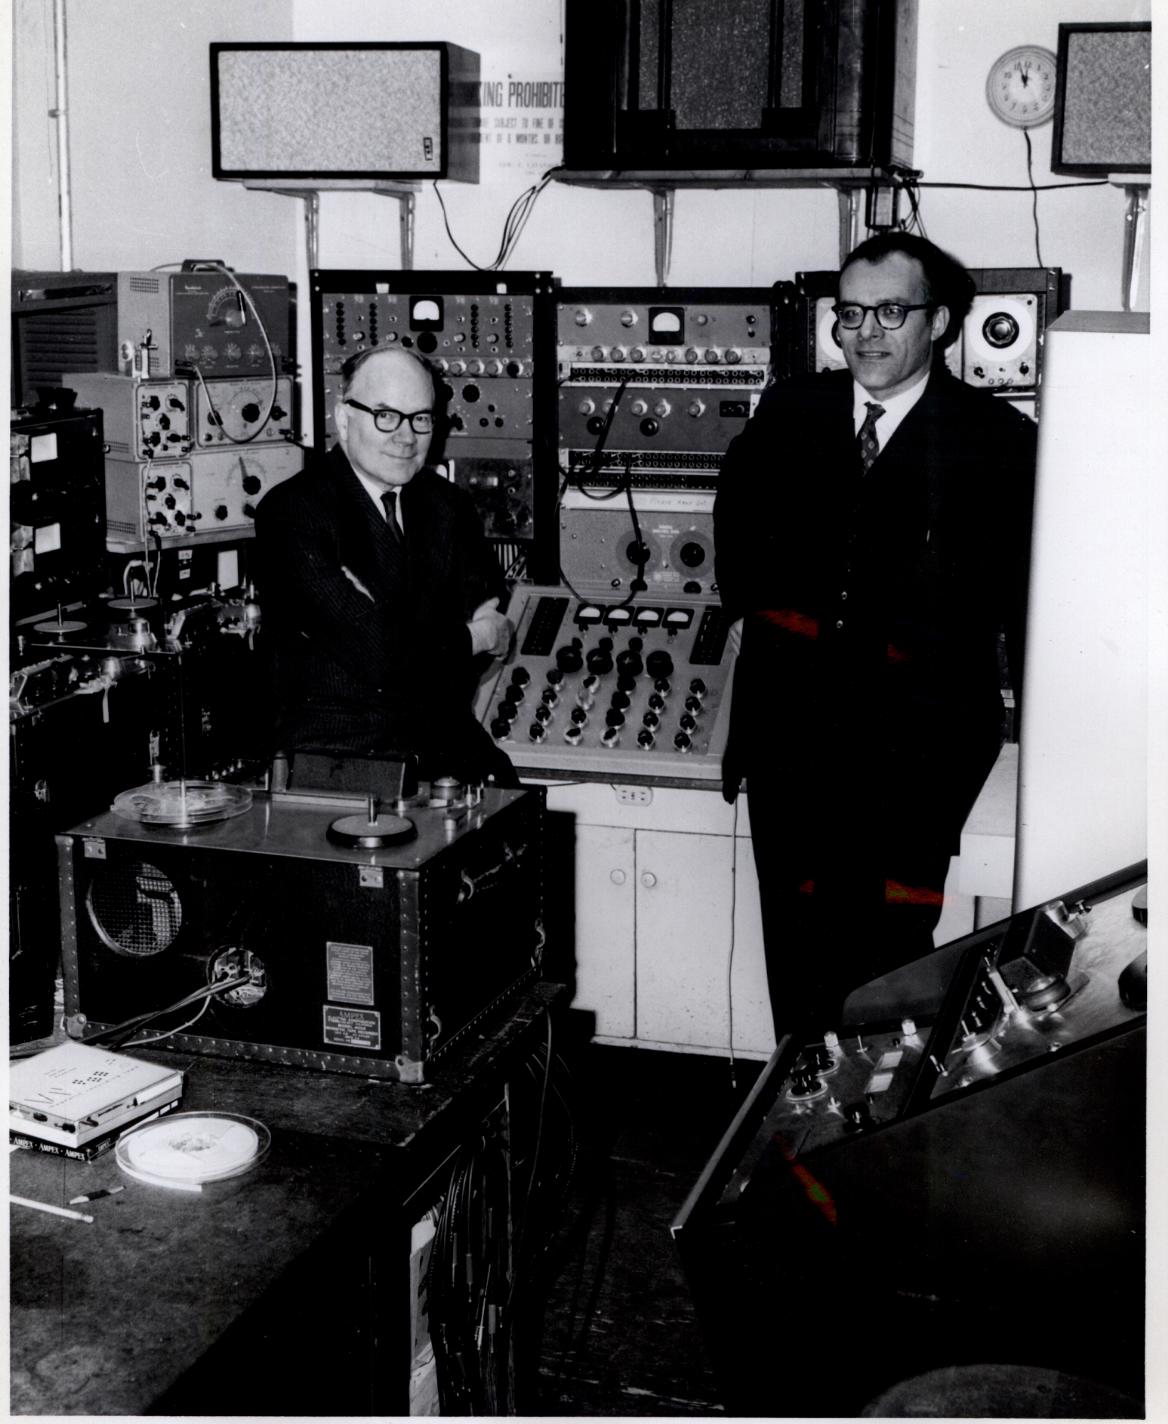 Otto Luening and Vladimir Ussachevsky in the Electronic Music Center